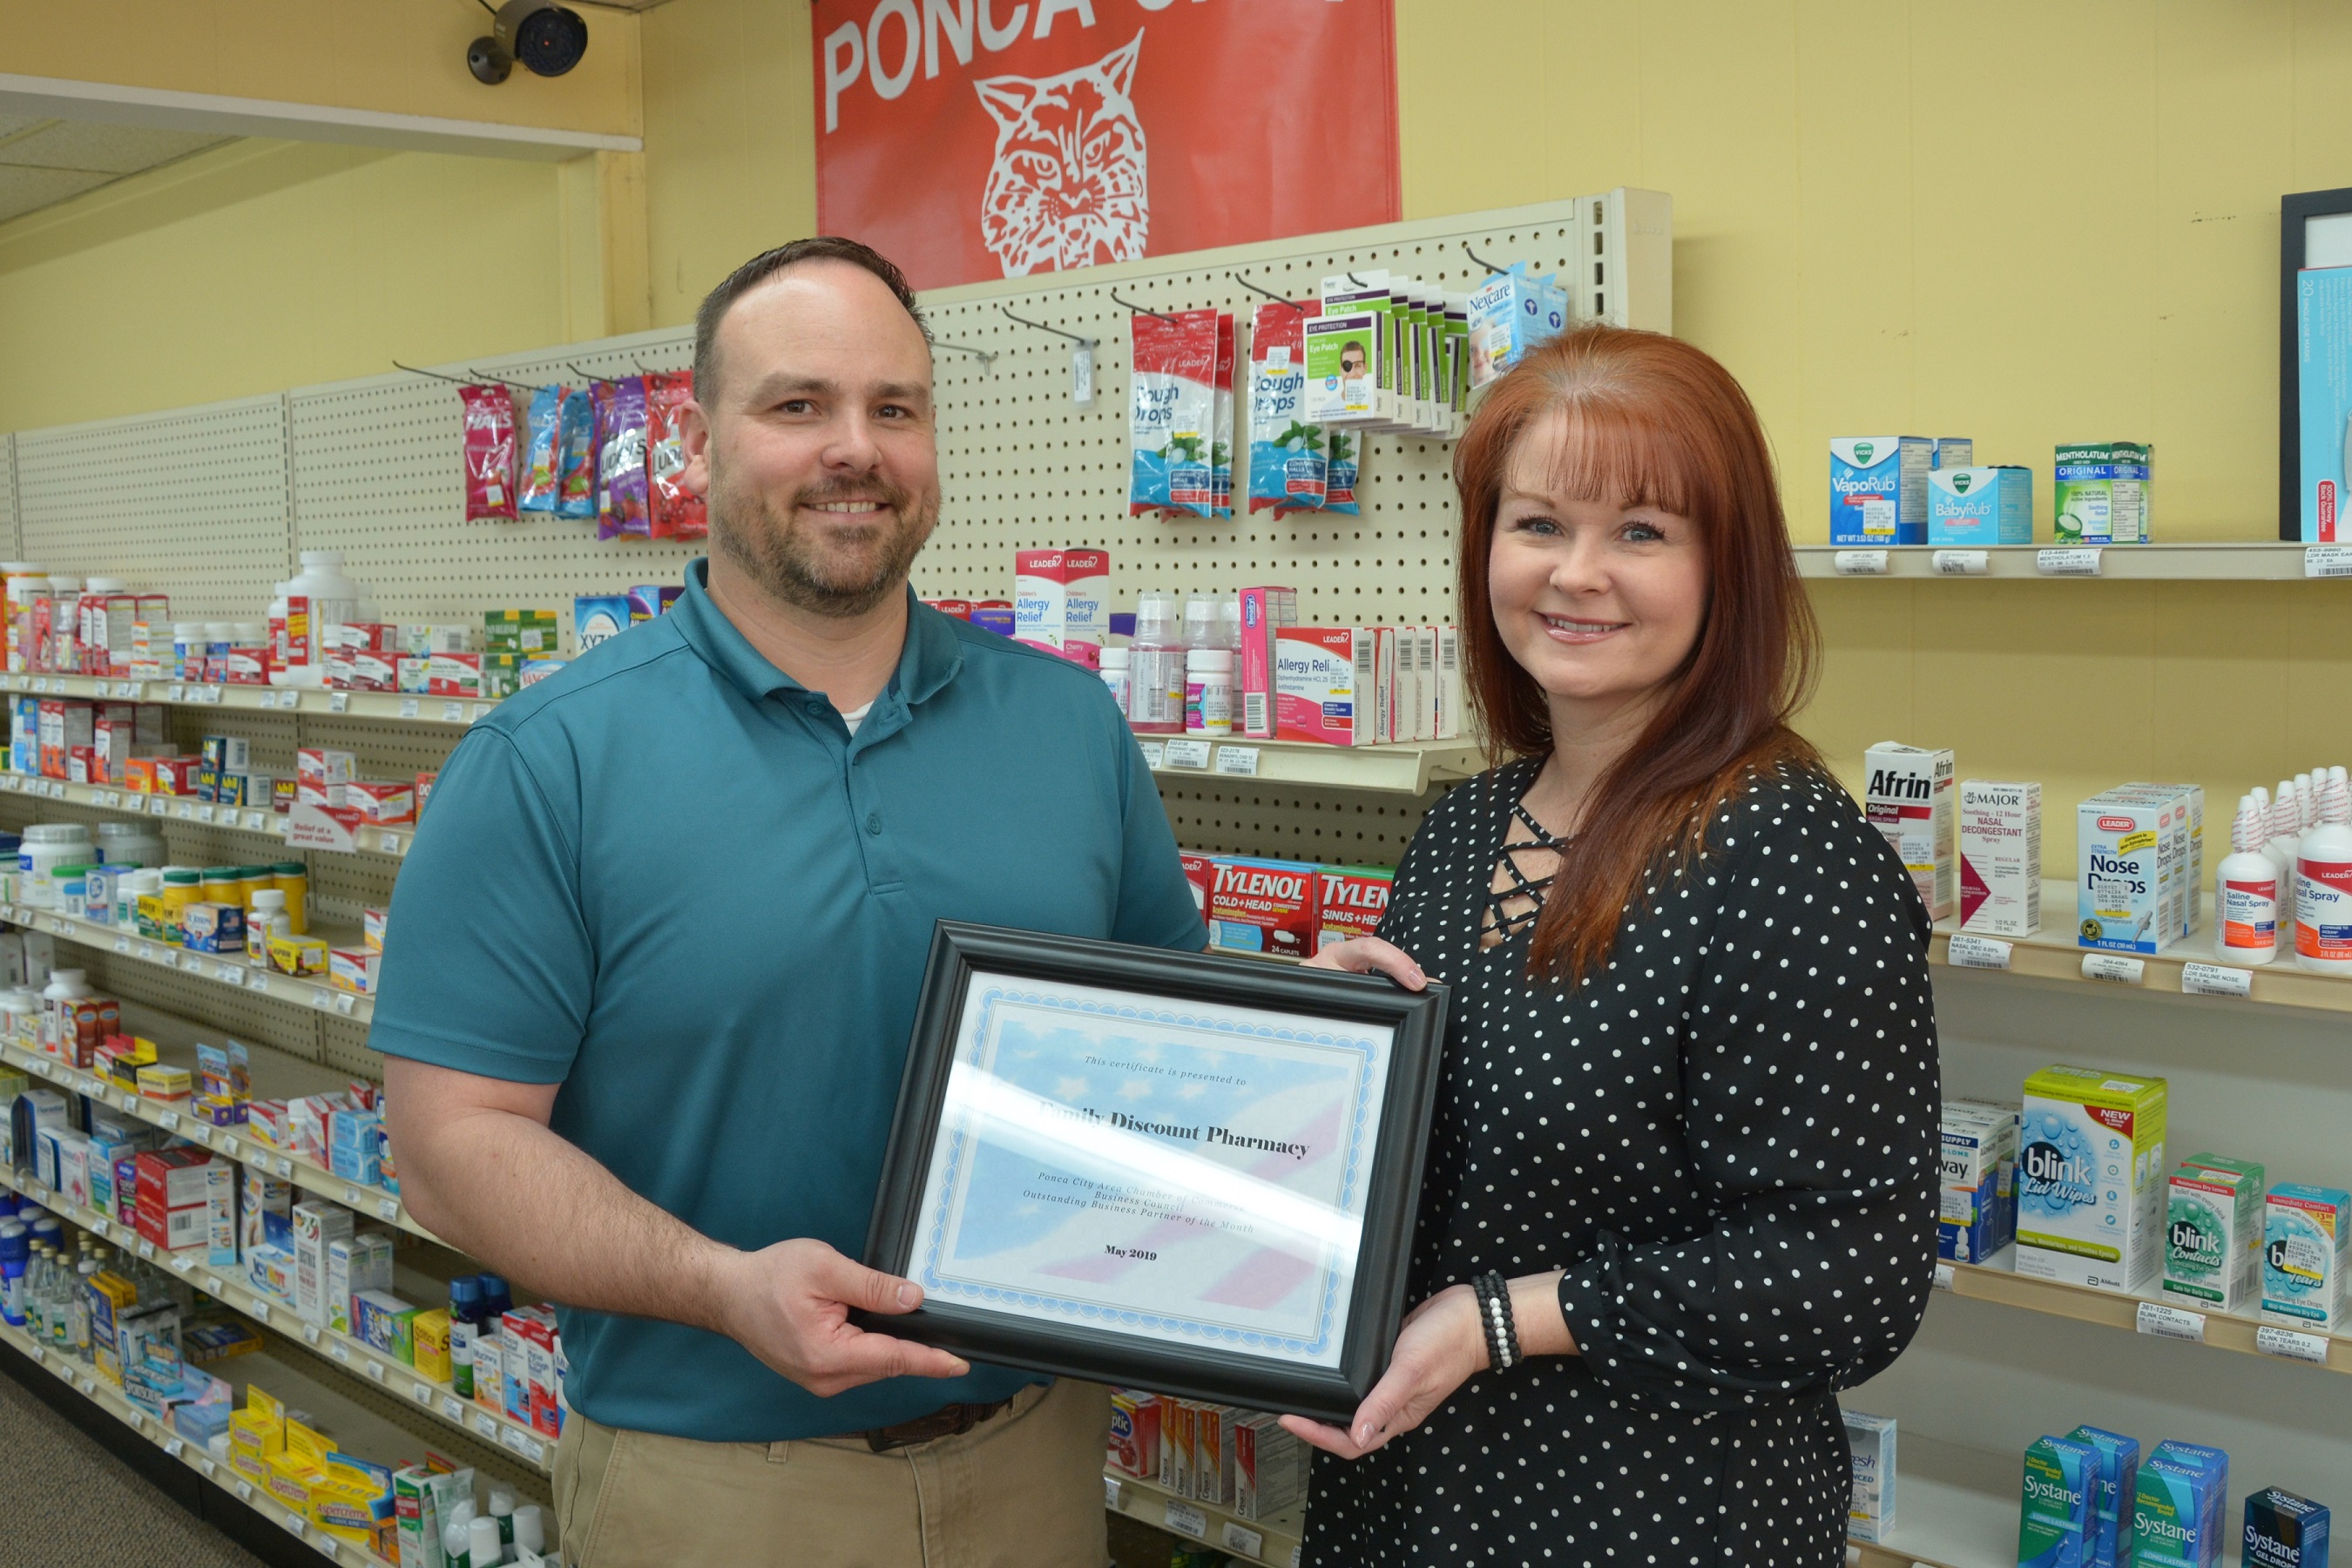 Family Discount Pharmacy named business partner of the month